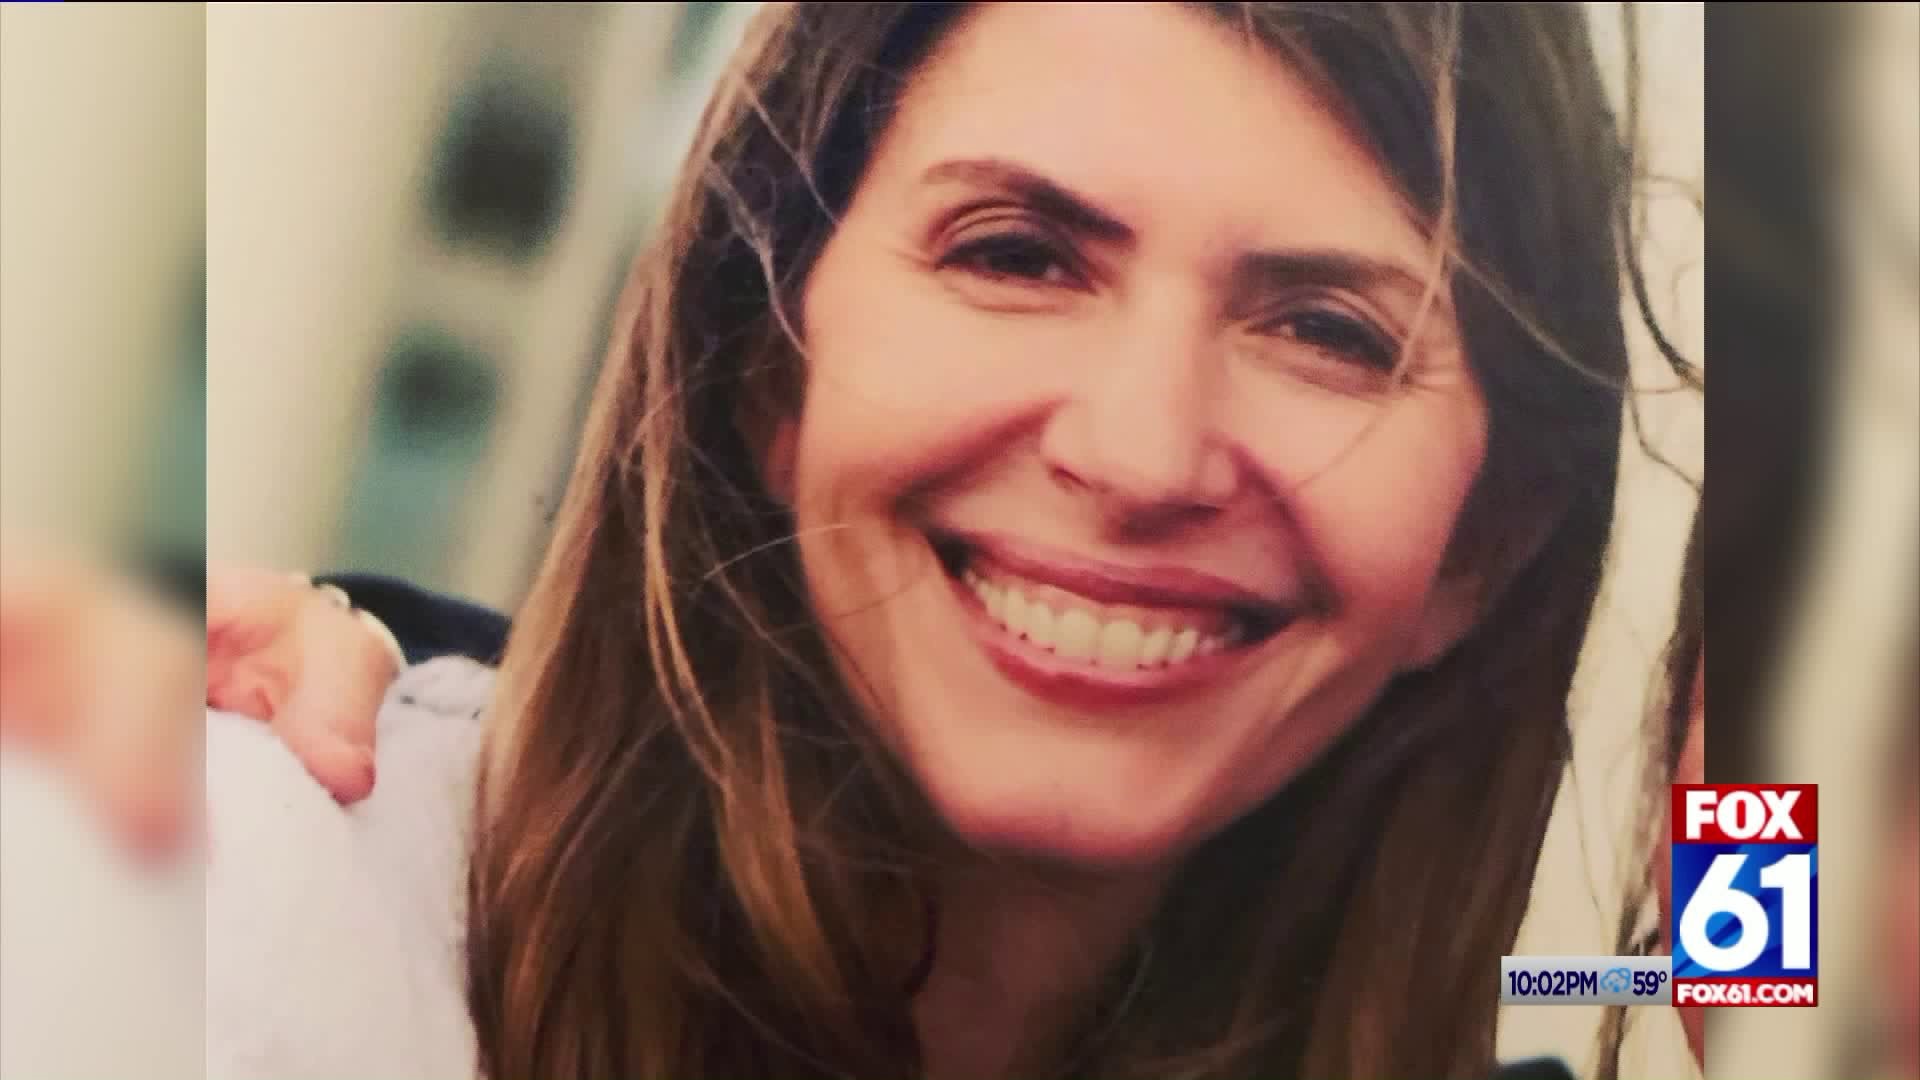 Vigil for missing New Canaan mom